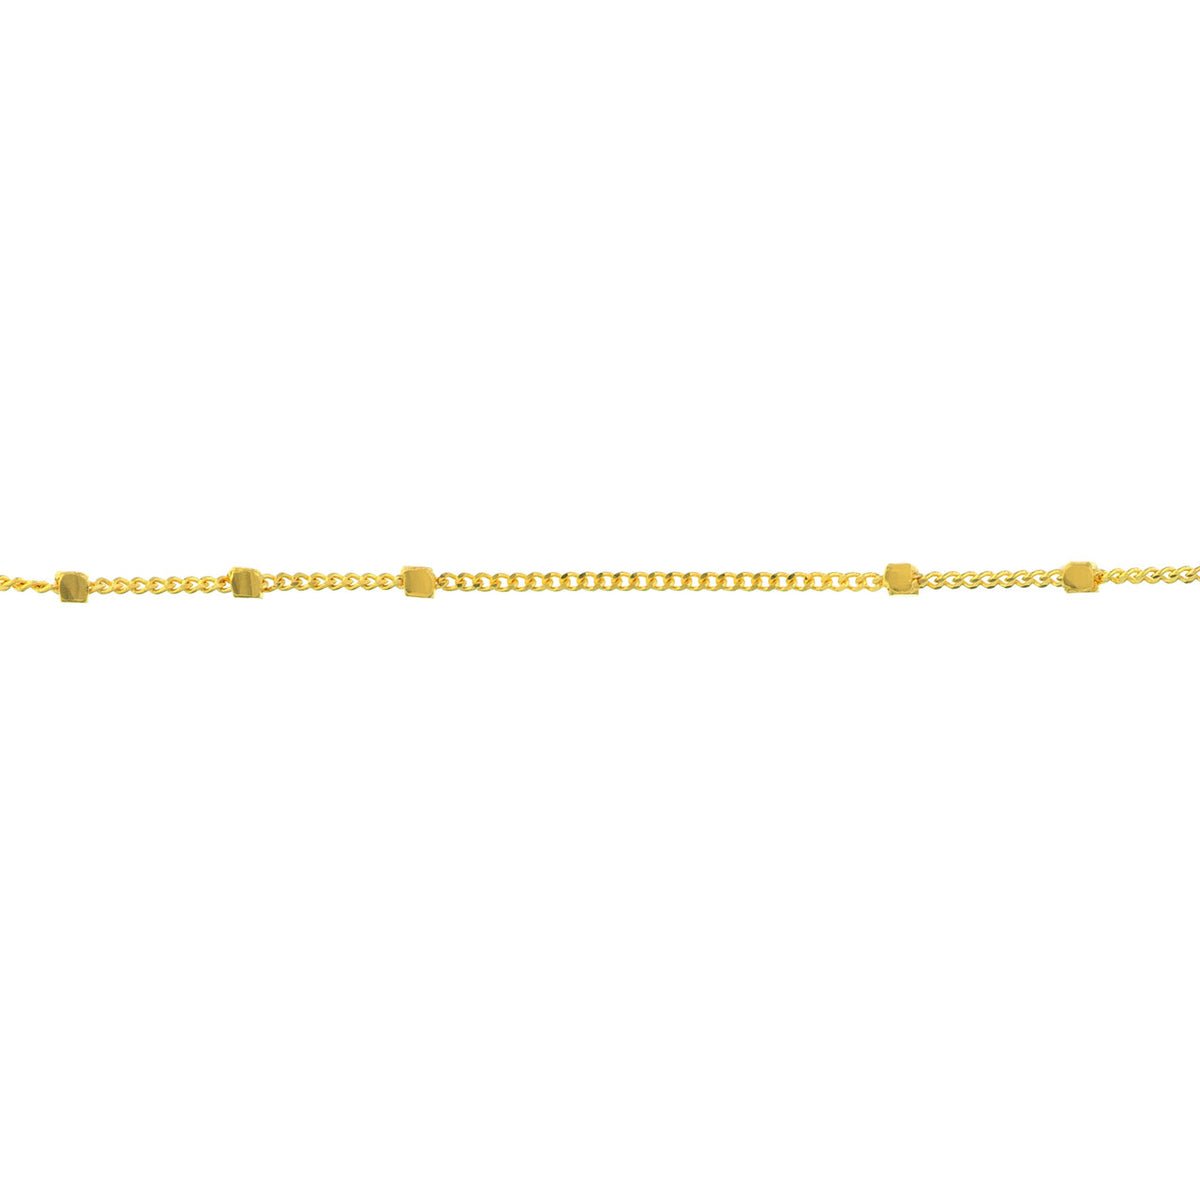 14K Yellow Gold Or White Gold Triple Bead Saturn Chain Necklace with Lobster Lock